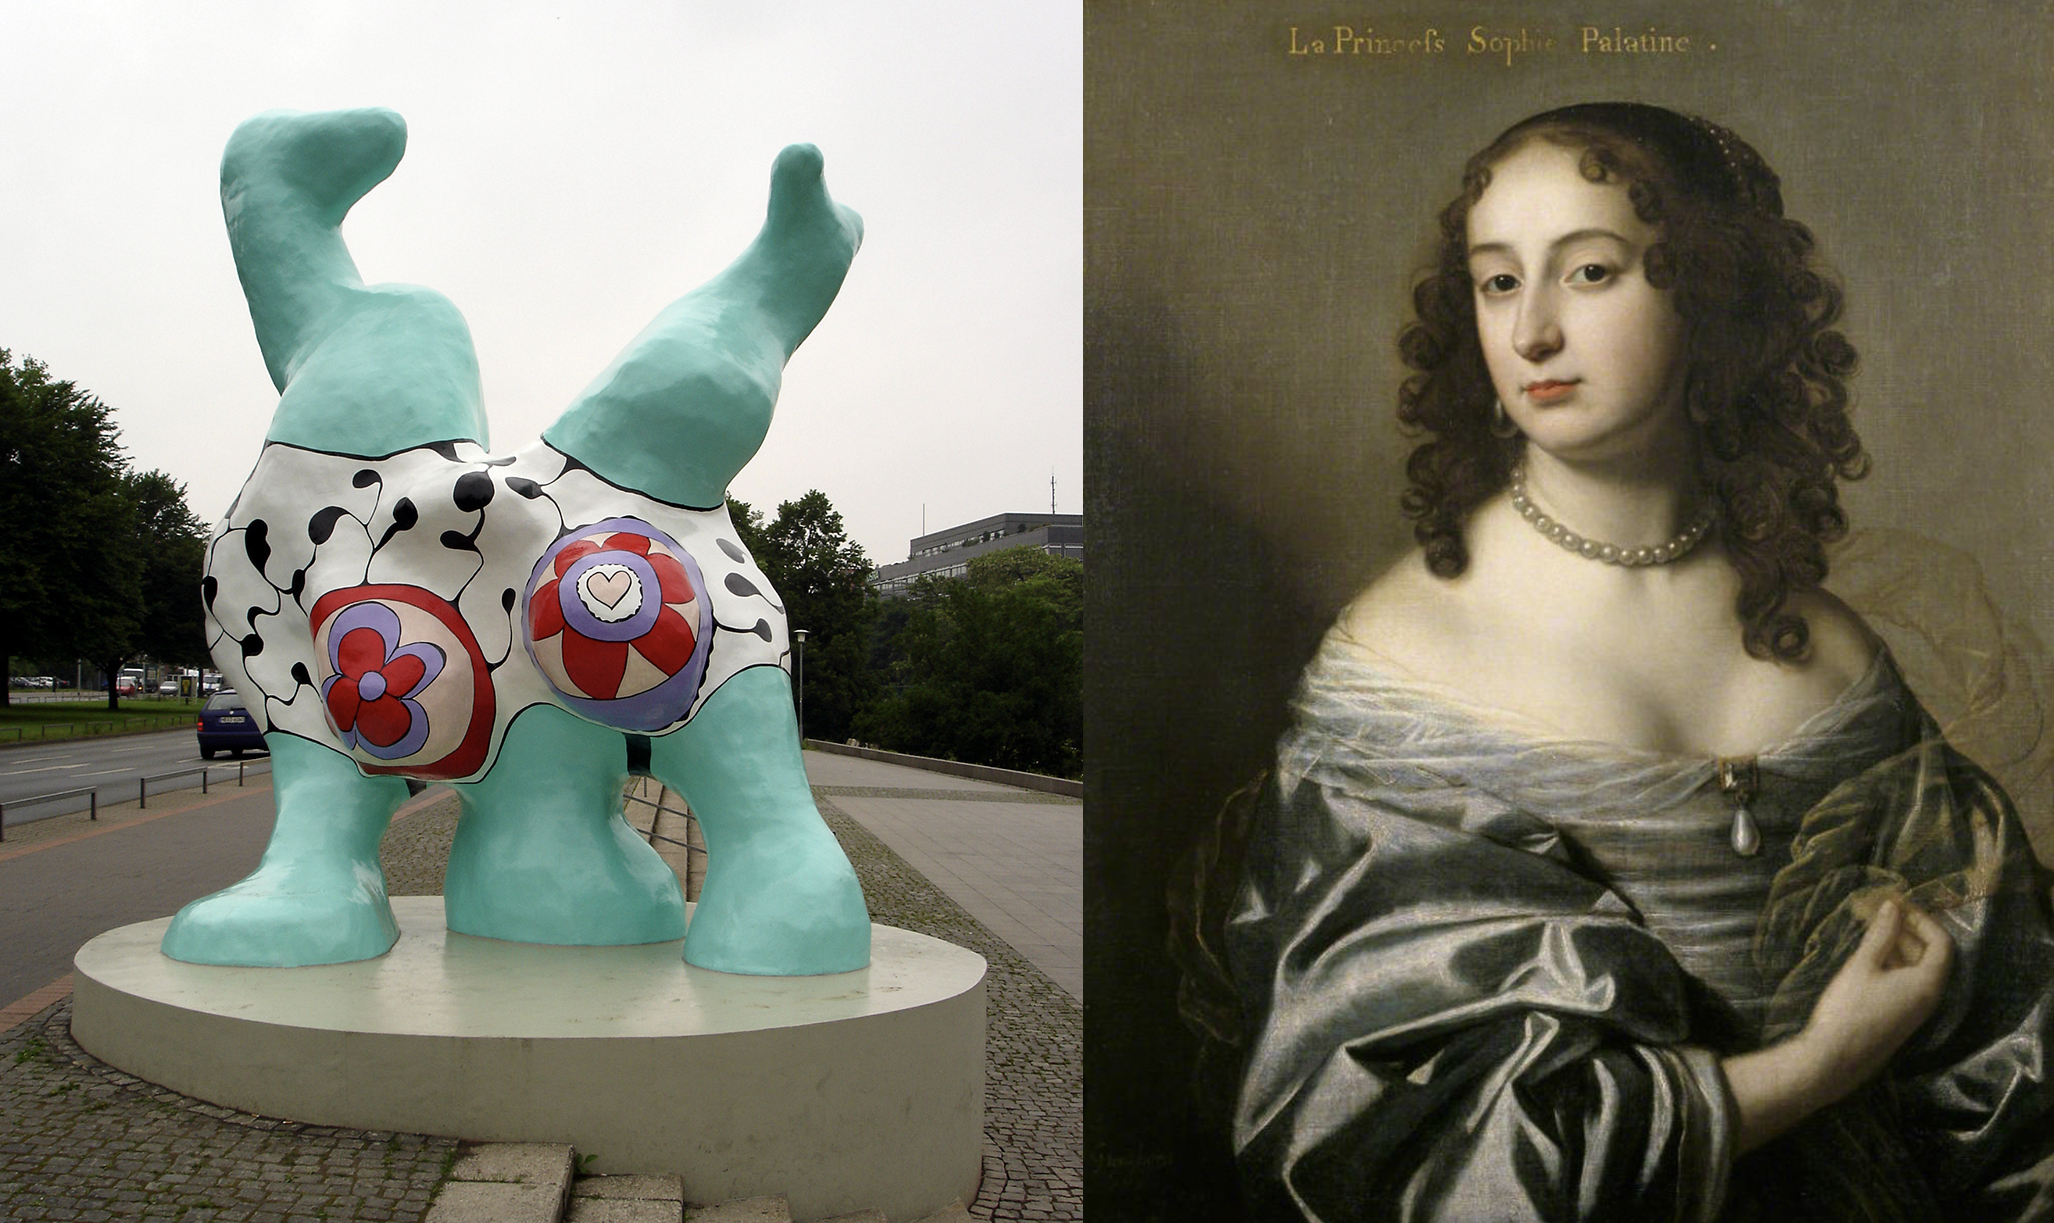 on the left an image of green uside down Nana sculpture Sophie; on the right a painted portrait of princess Sophie of Hannover